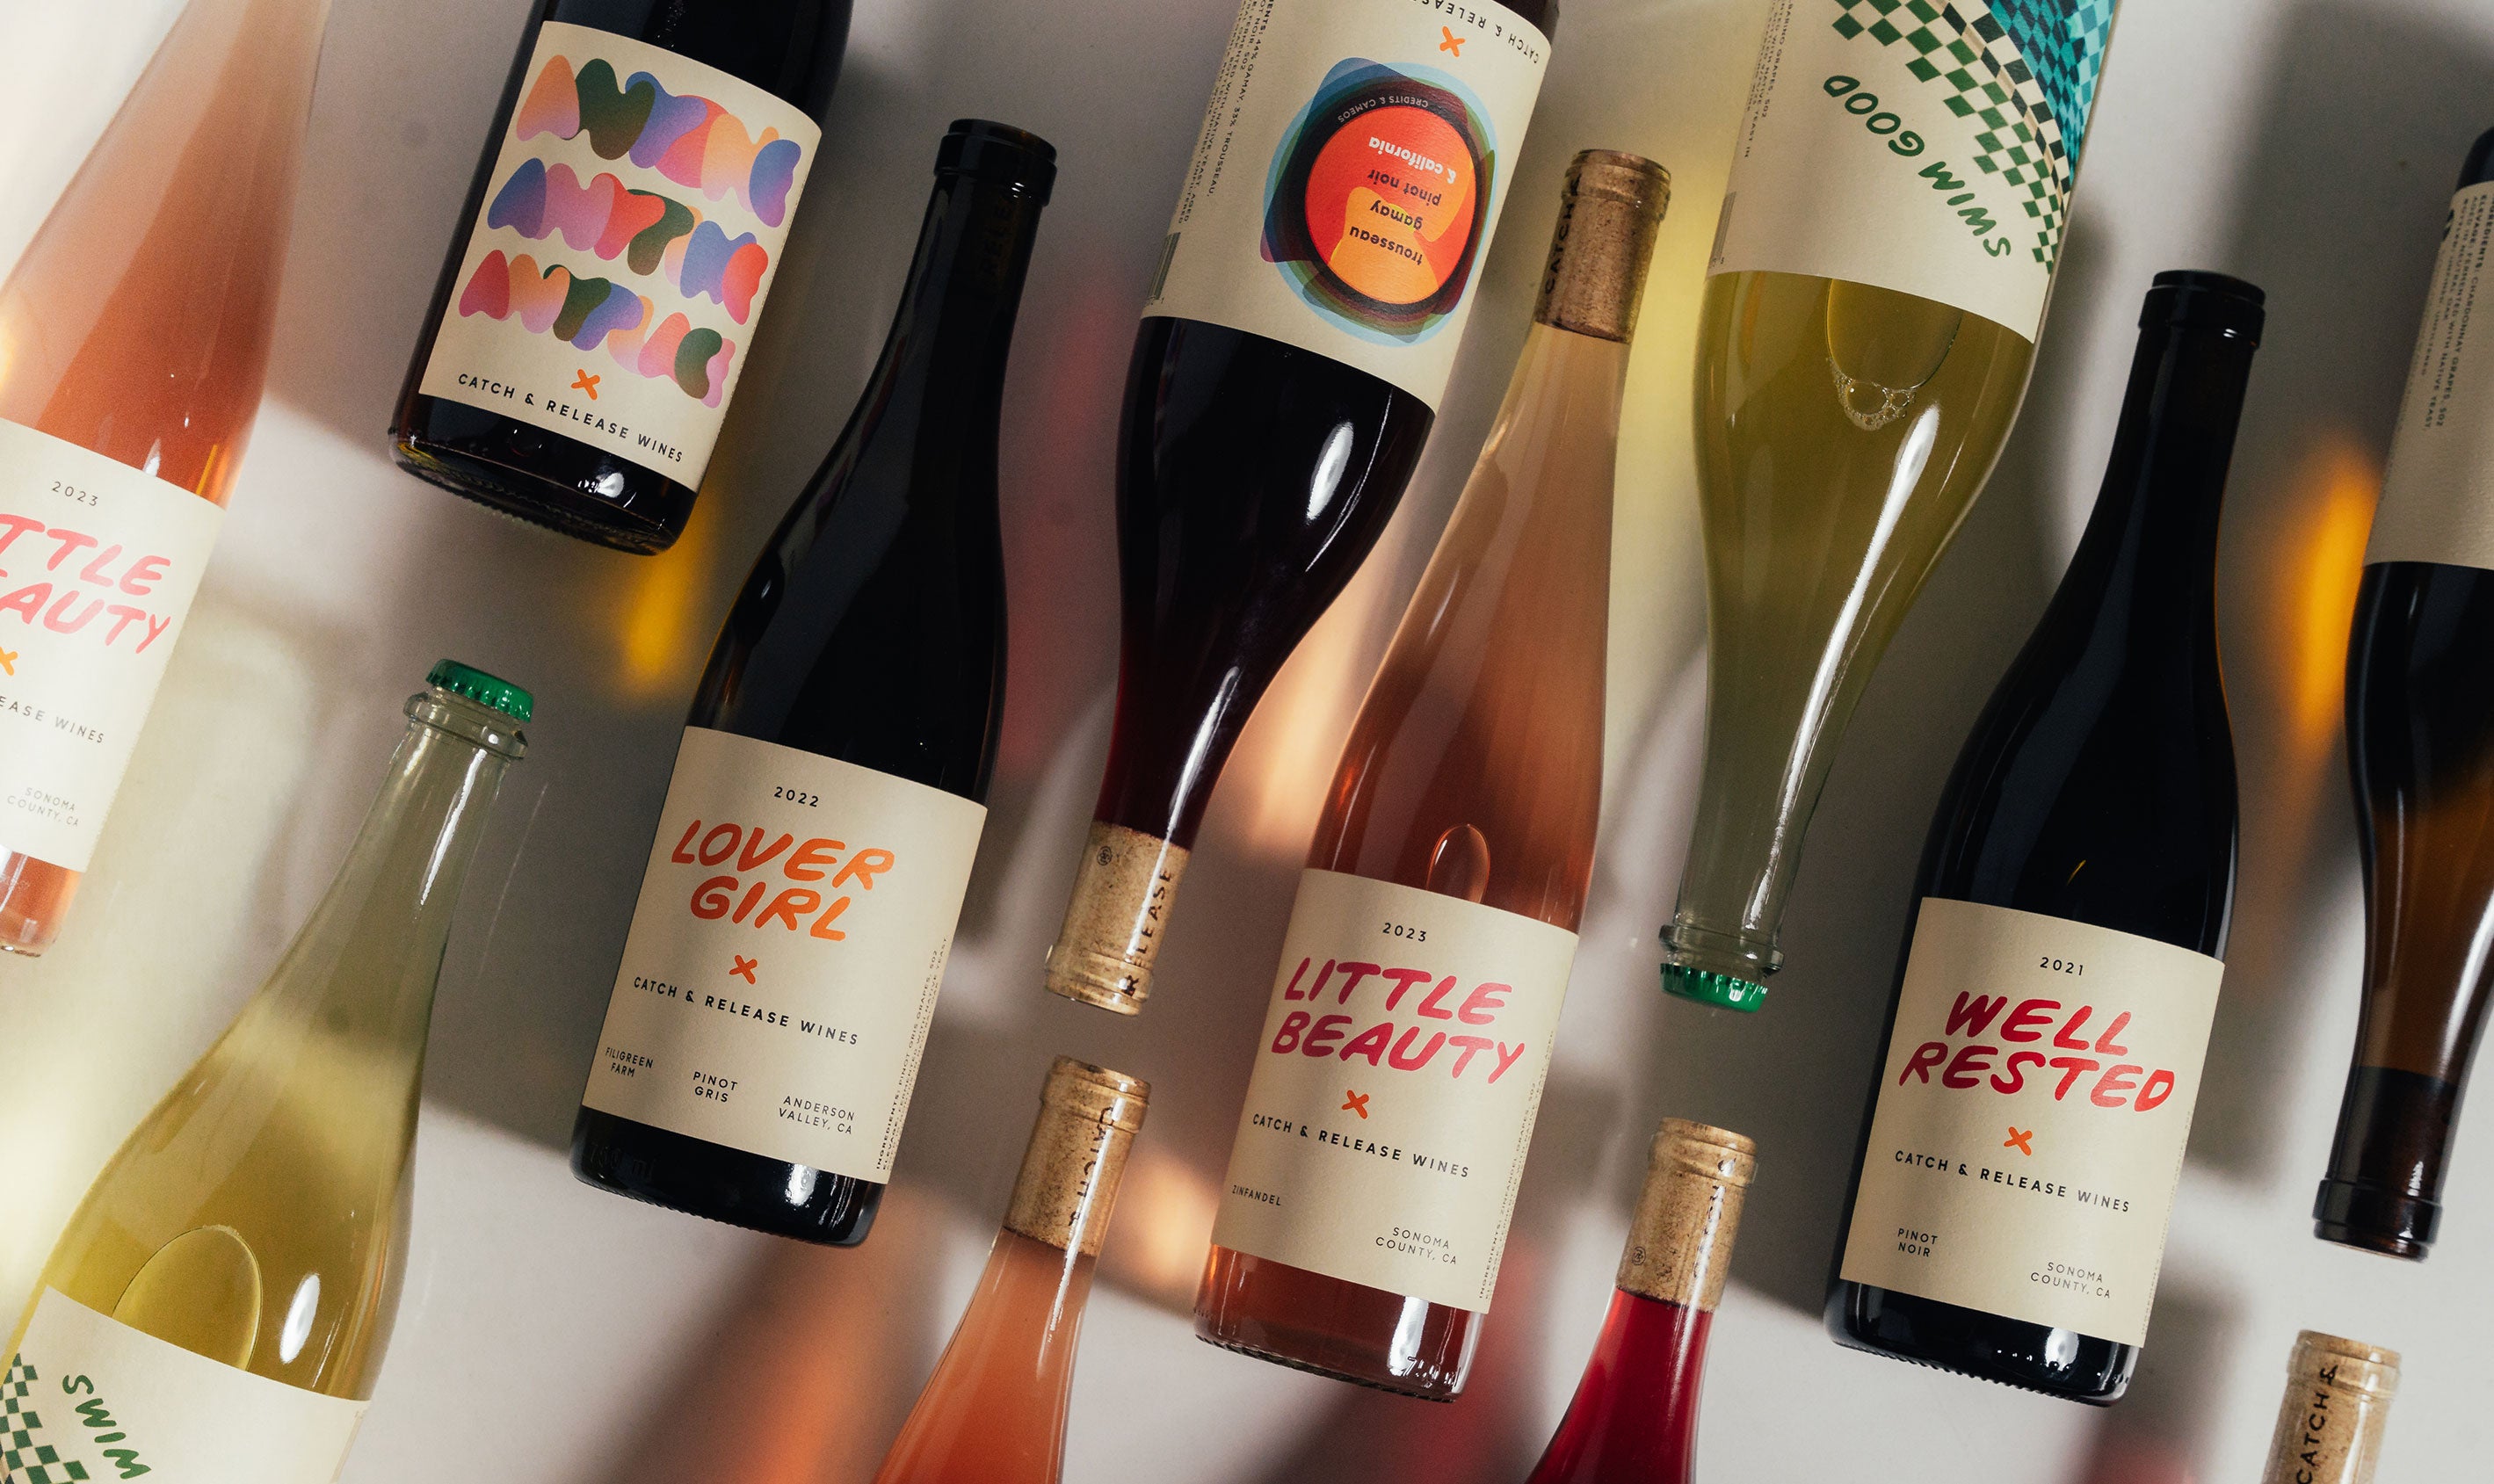 Catch & Release Wines selection of natural wines including Little Beauty Rosé, Well Rested Pinot Noir, and Lover Girl Pinot Gris.